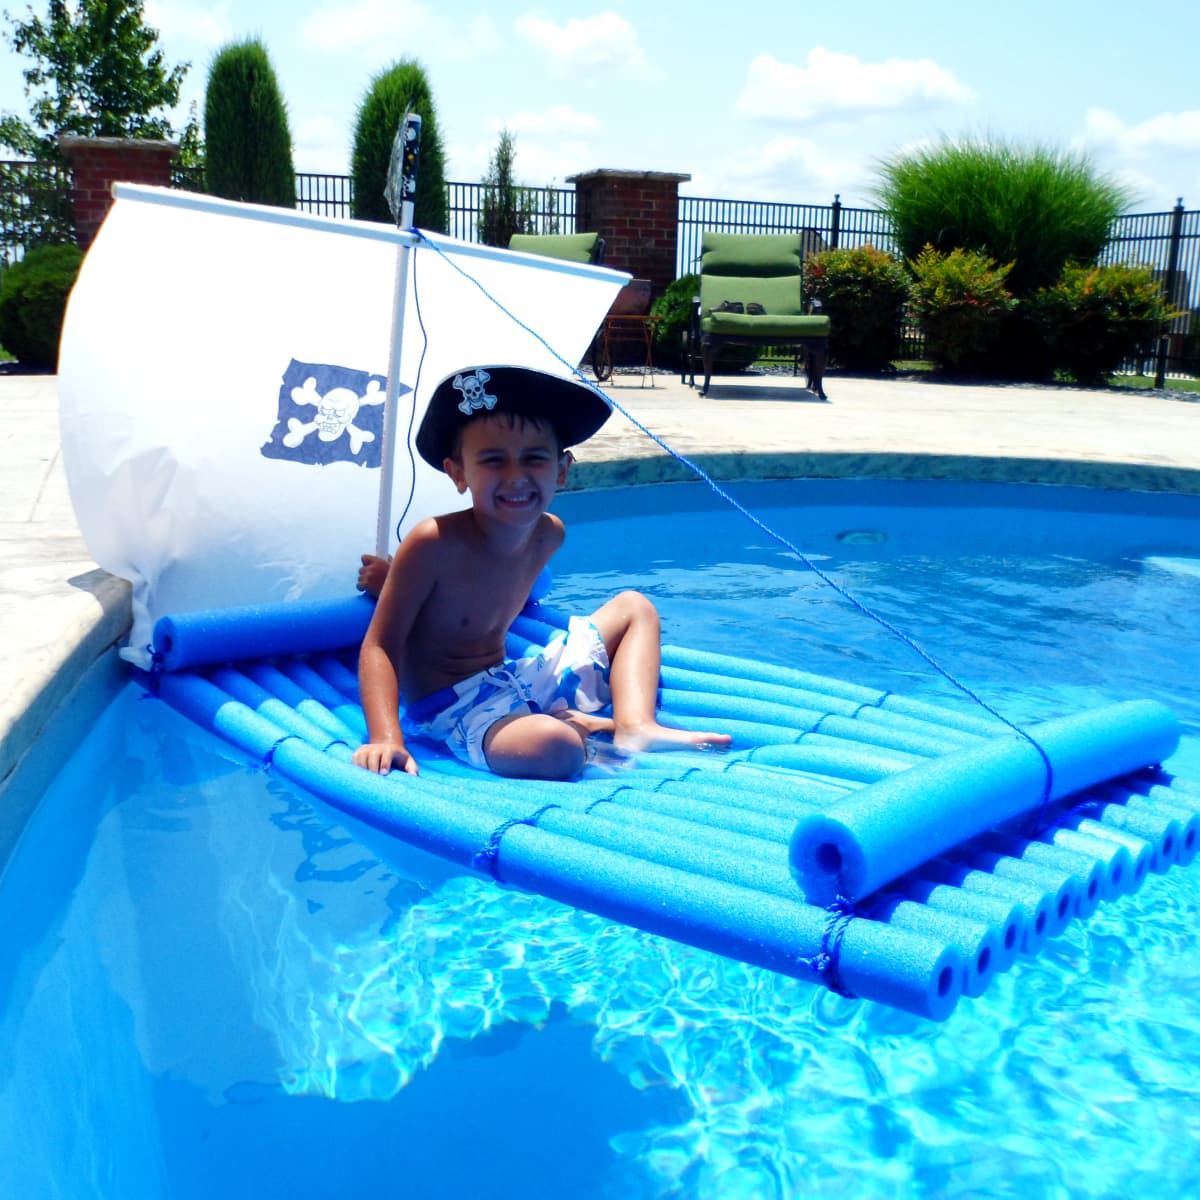 How to Make a Pirate Raft Using Pool Noodles - FeltMagnet